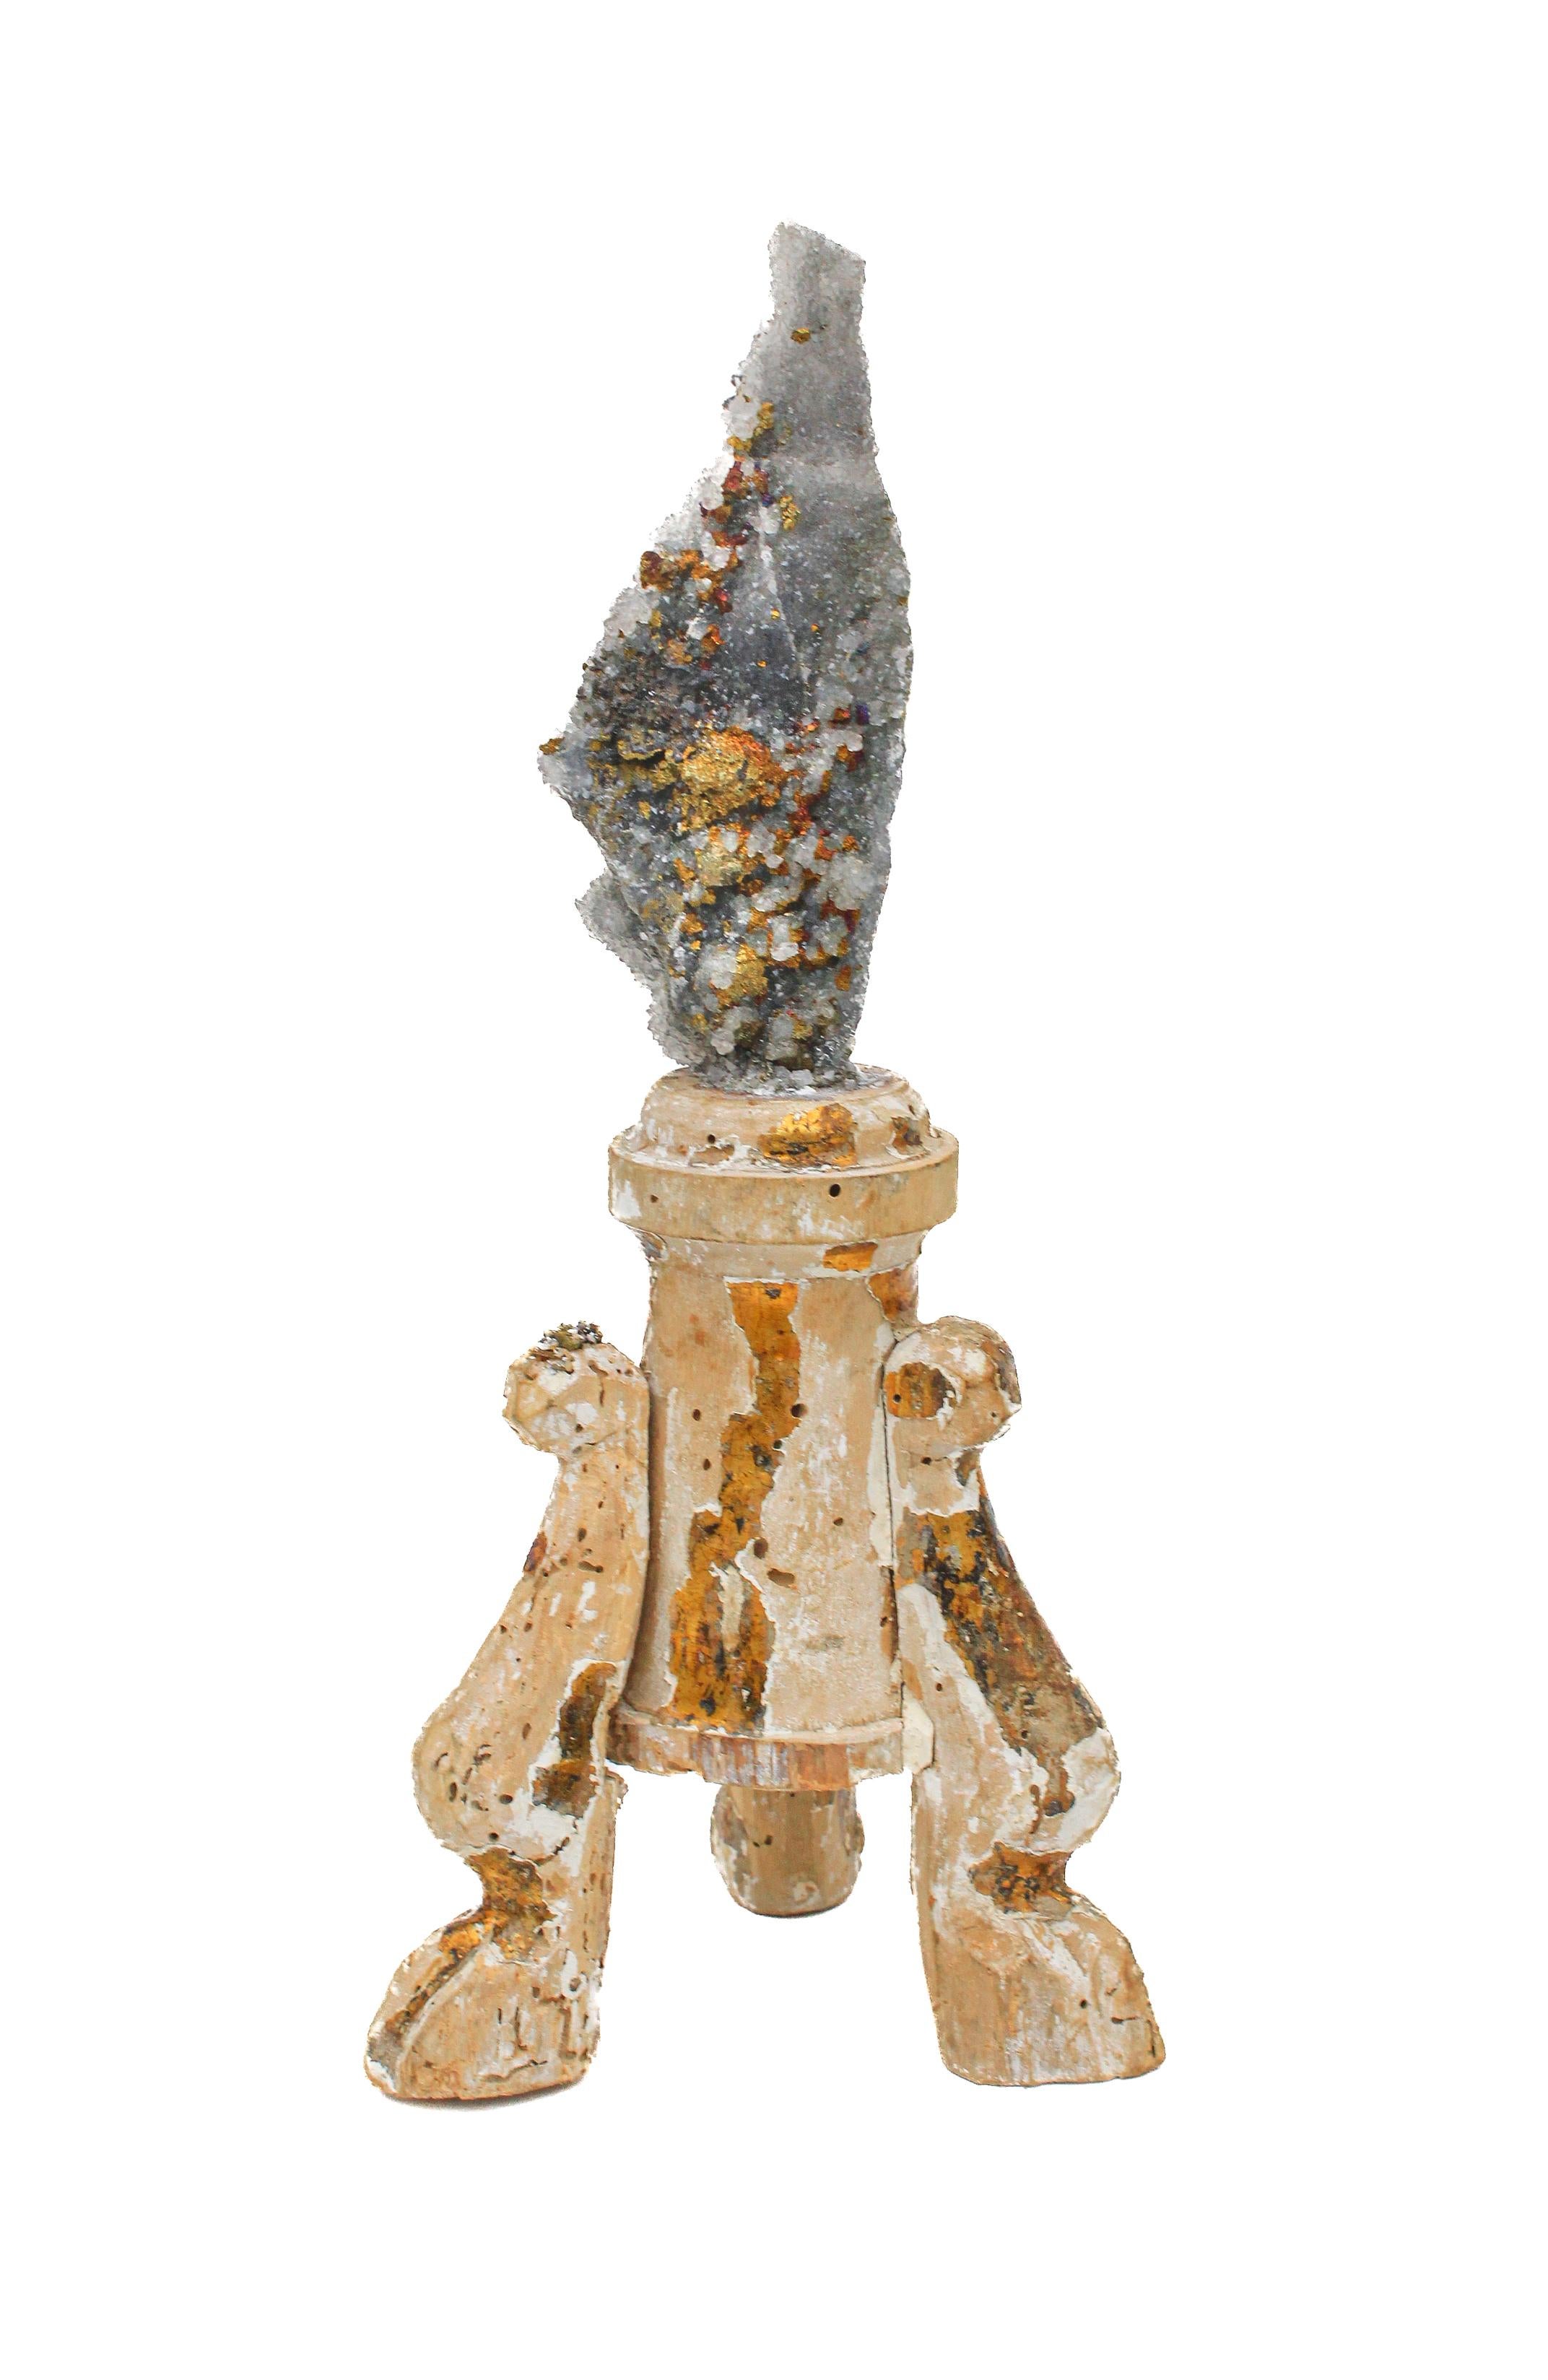 17th century Italian fragment mounted with chalcopyrite in a druzy crystal matrix.

This fragment was originally part of a candlestick from a church in Italy. It is distressed from time but still has the original mecca gold leaf on aspects of the